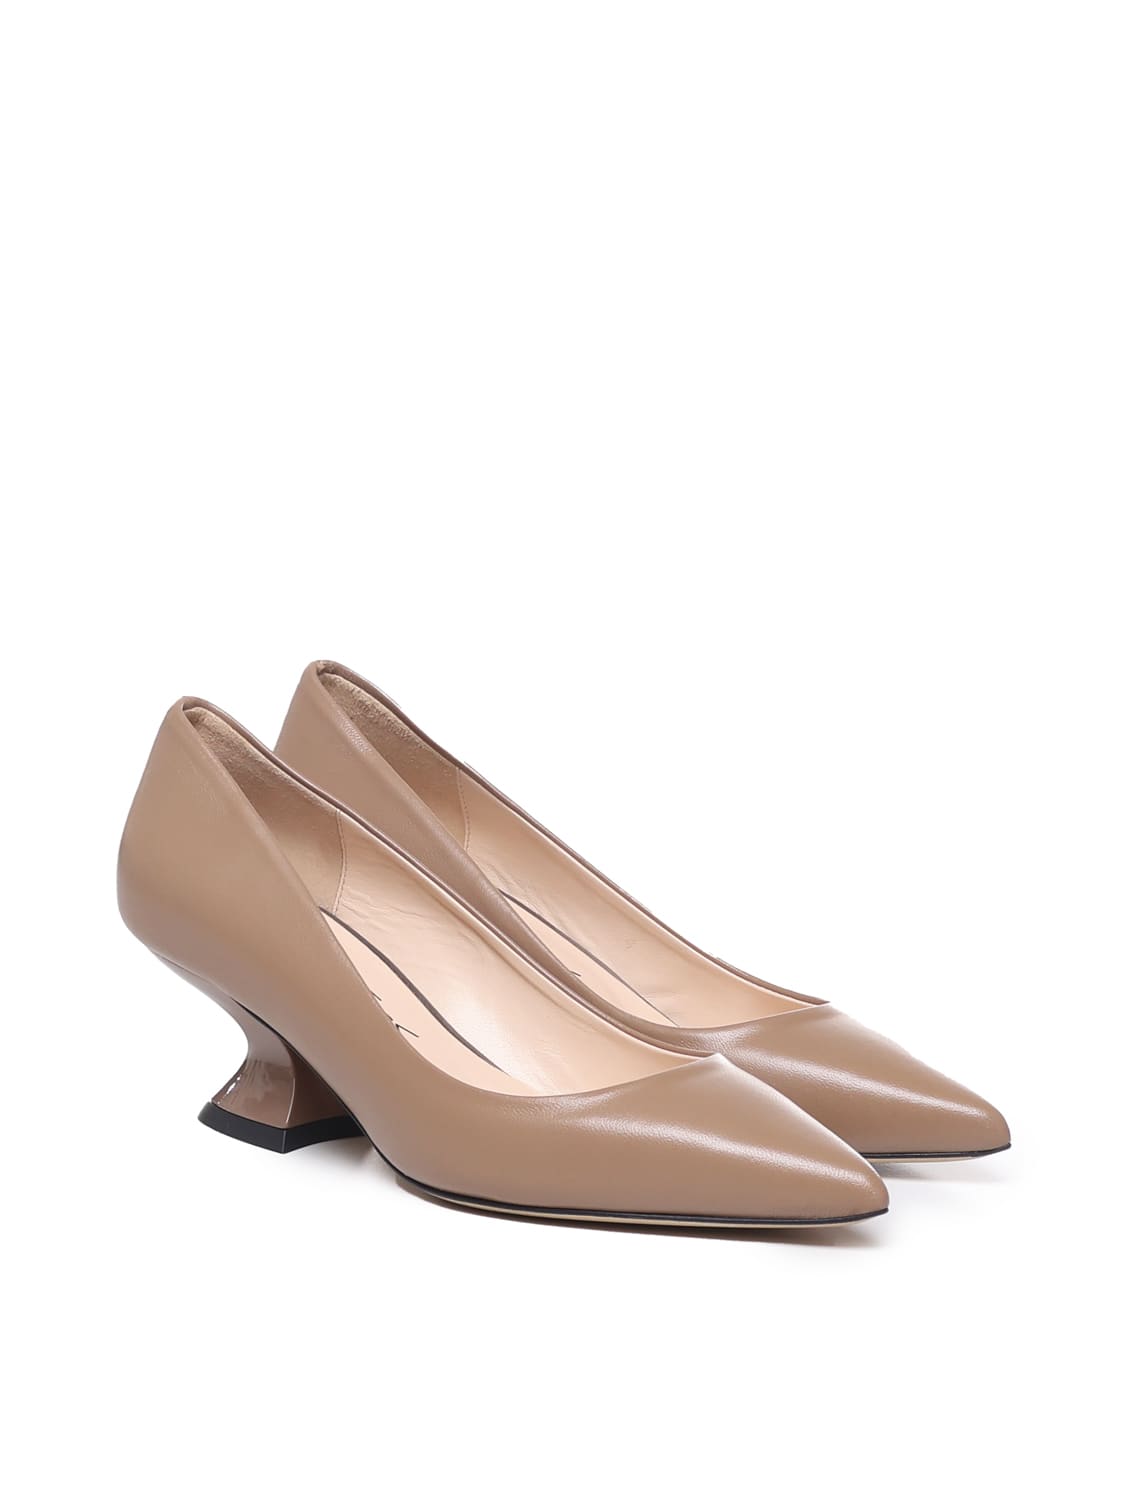 Shop Alchimia Leather Pumps With Wide Heel In Nude